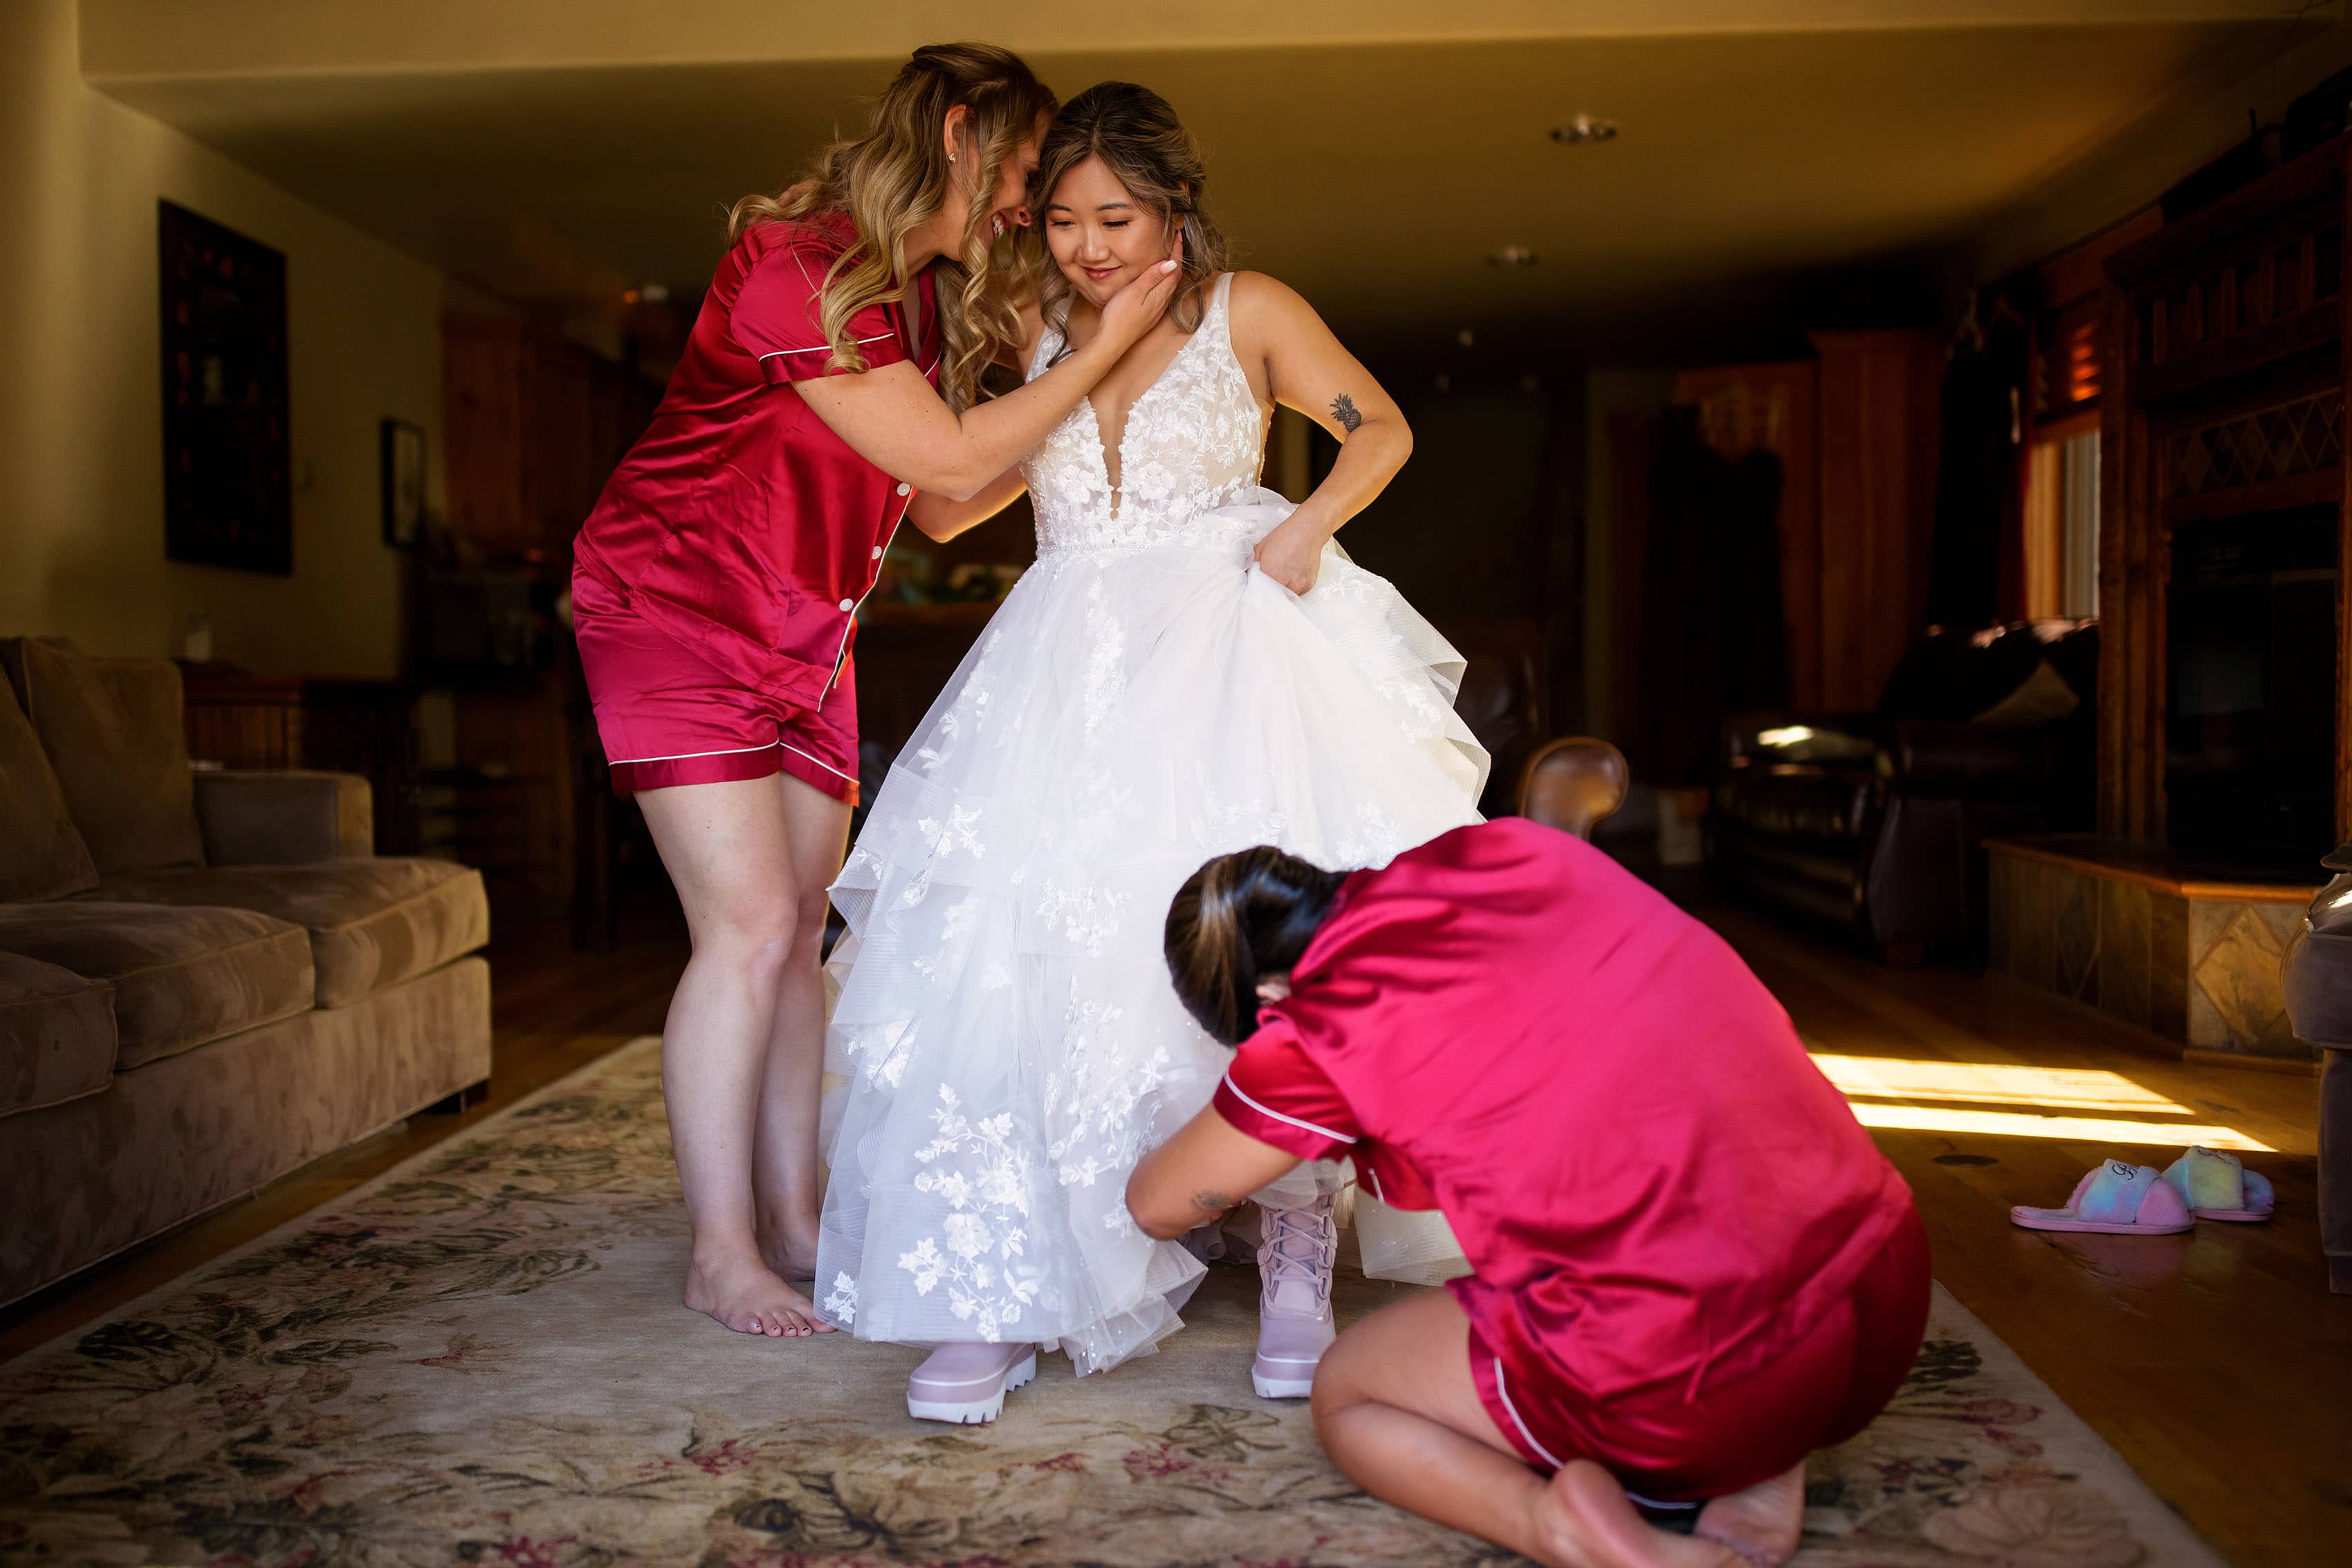 The bride gets help getting into her dress